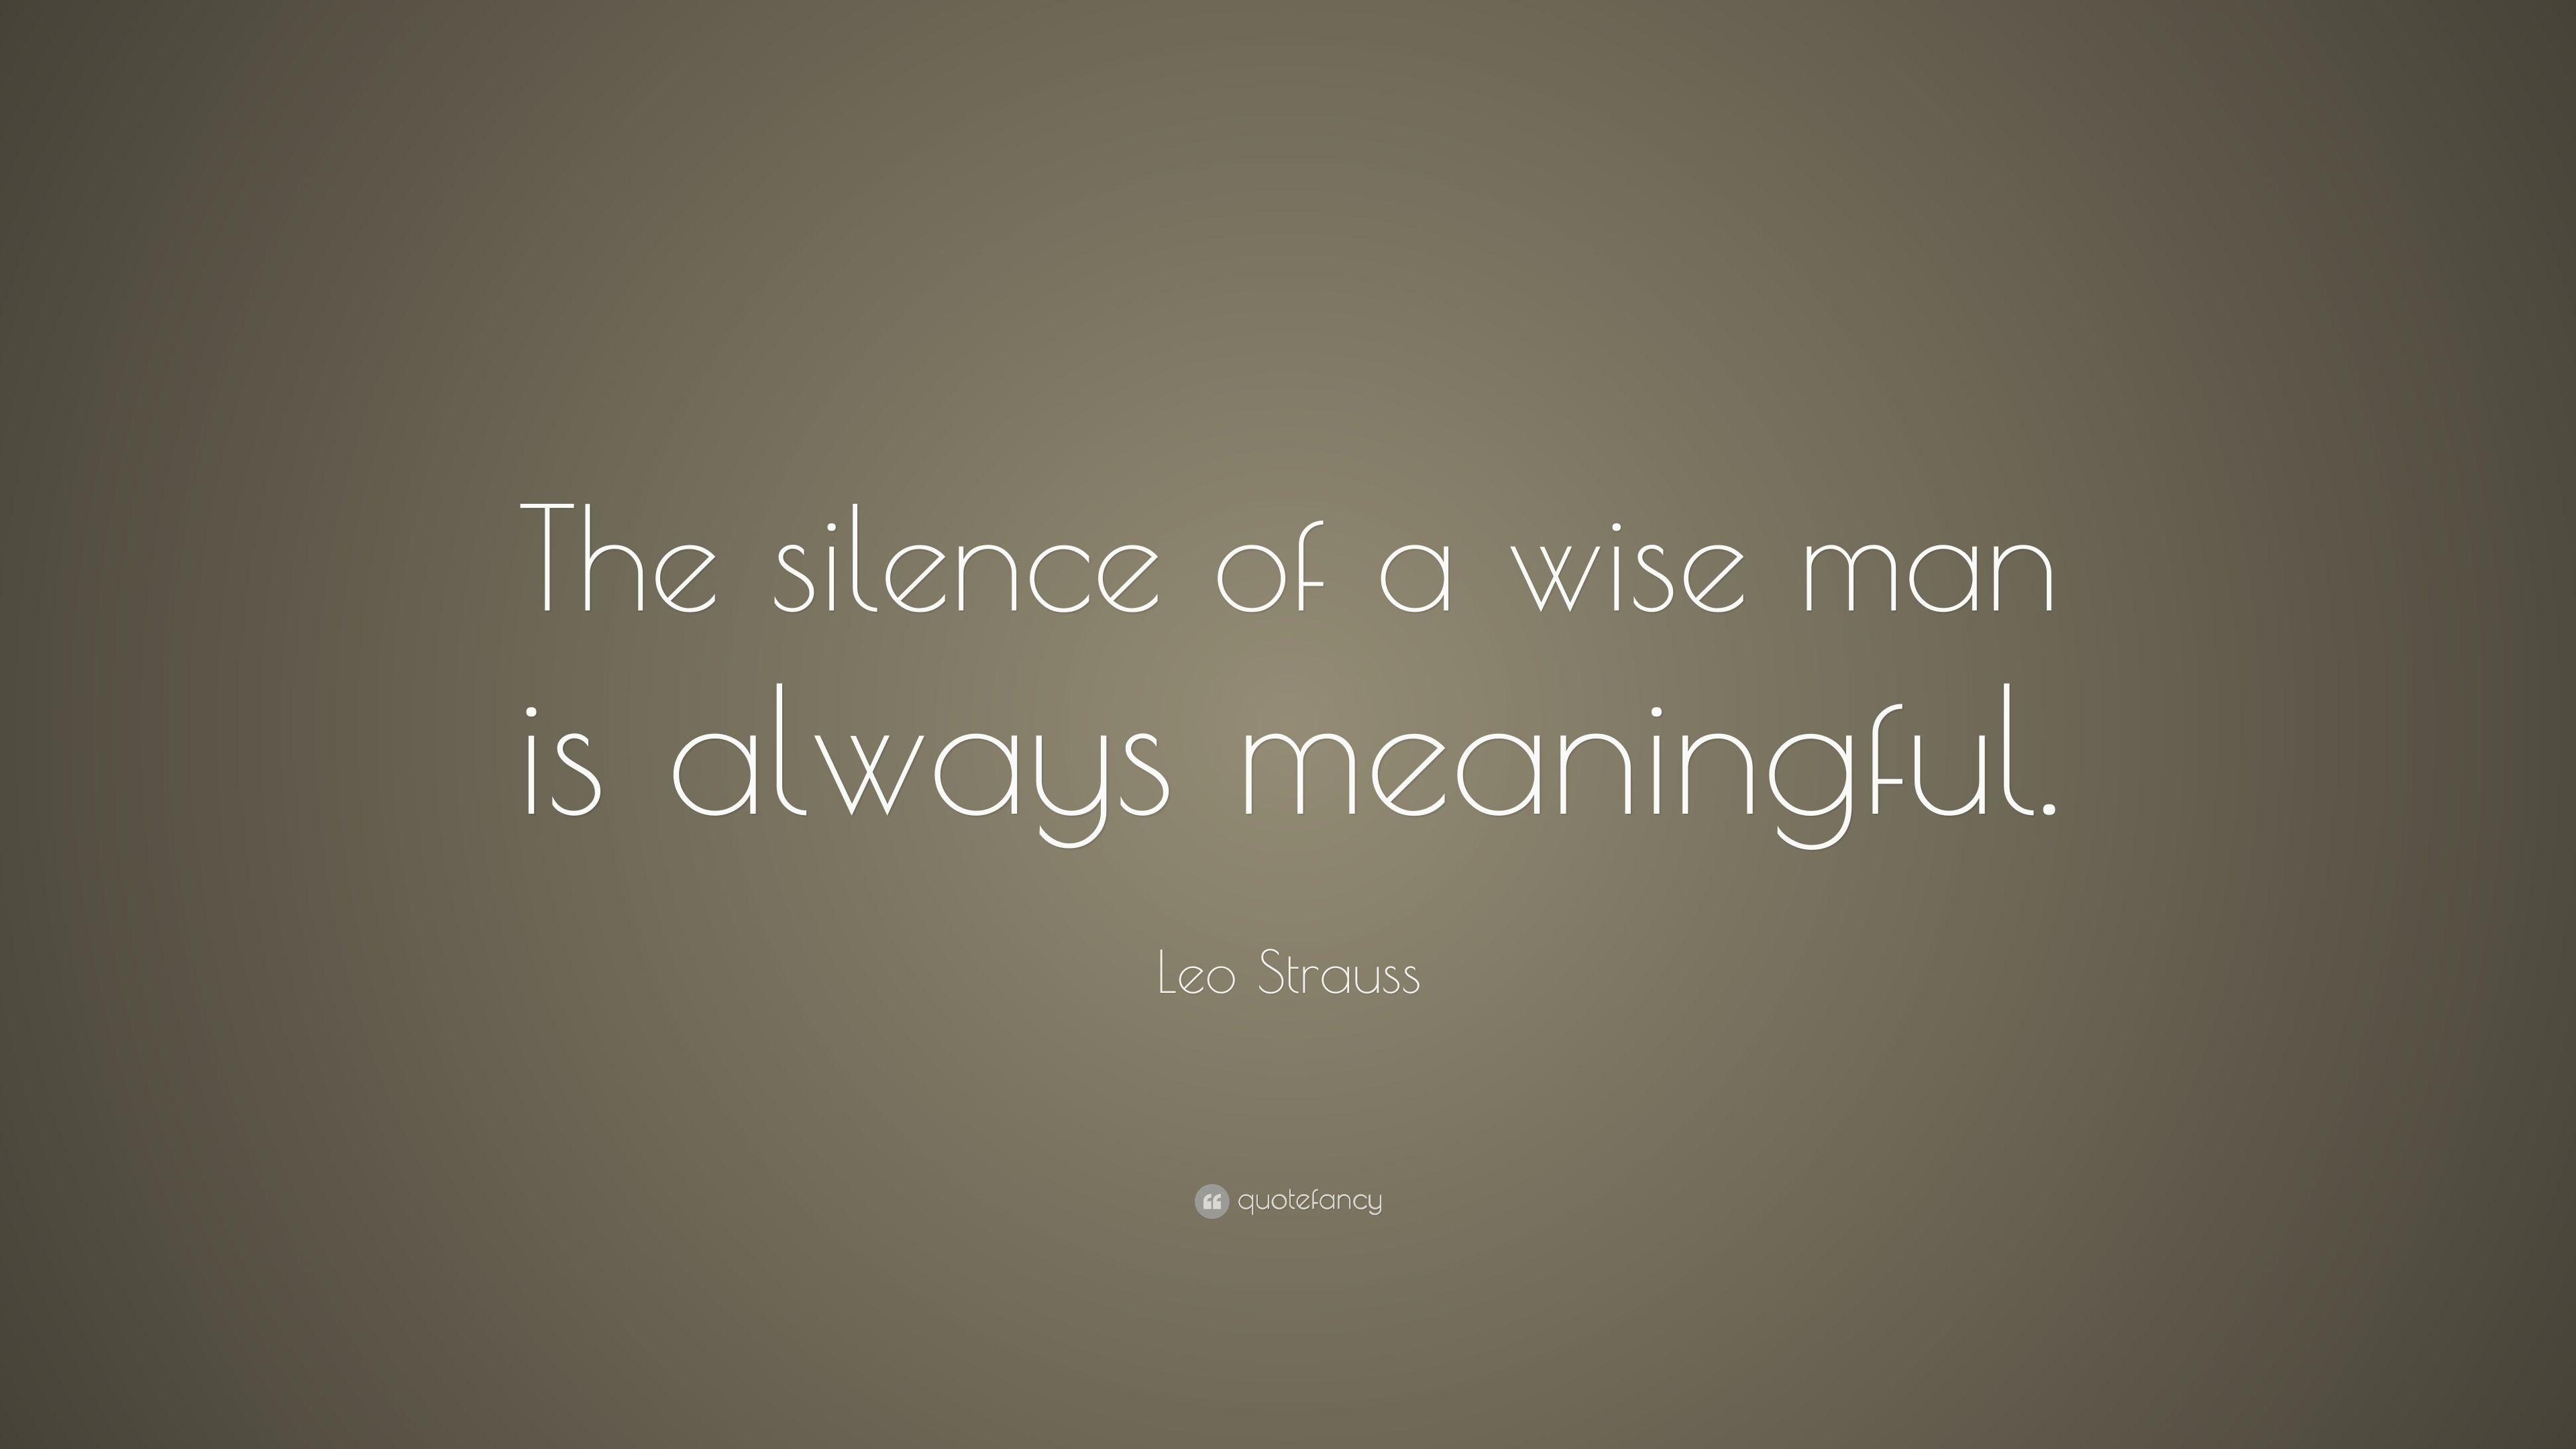 Leo Strauss Quote: “The silence of a wise man is always meaningful